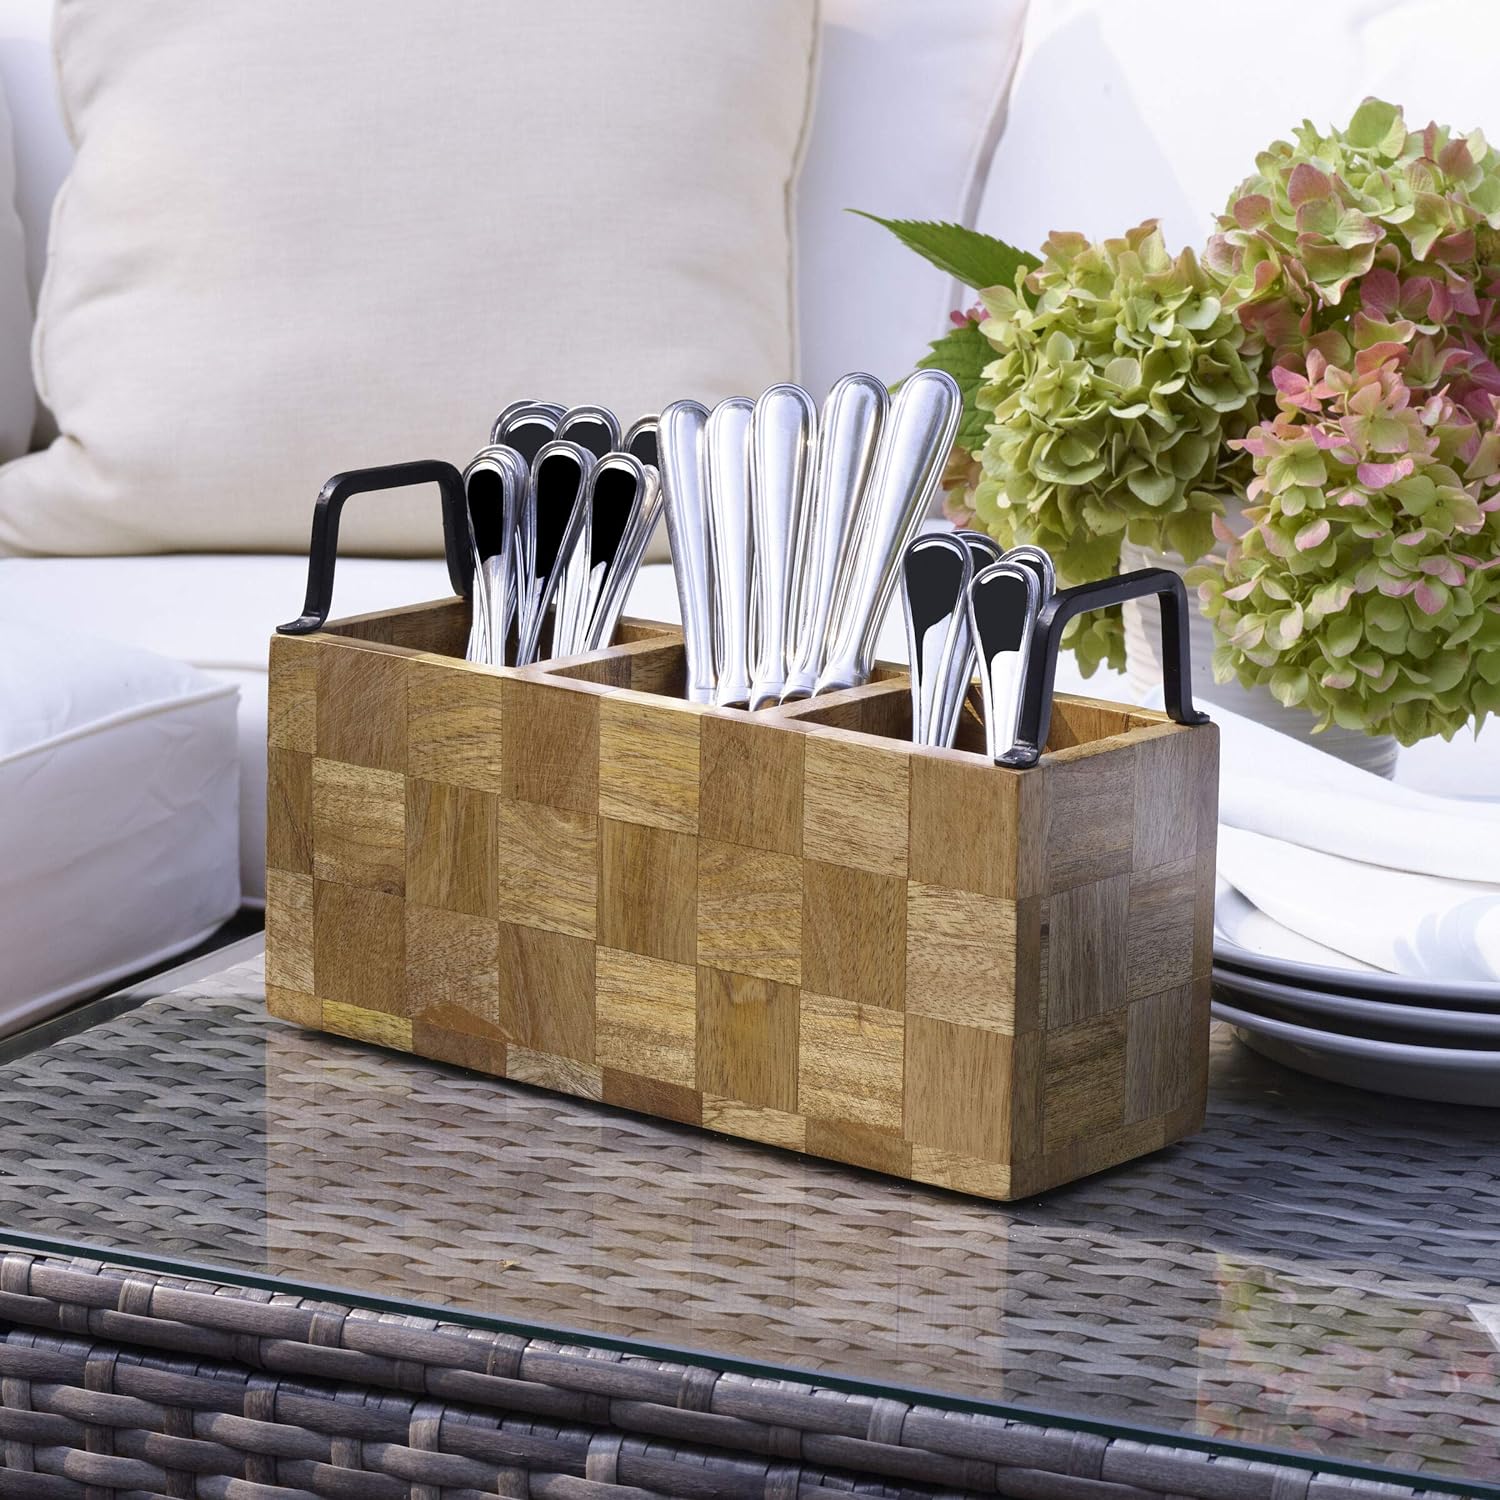 wooden 3 section caddy with metal handles set on a table and  filled with flatware.